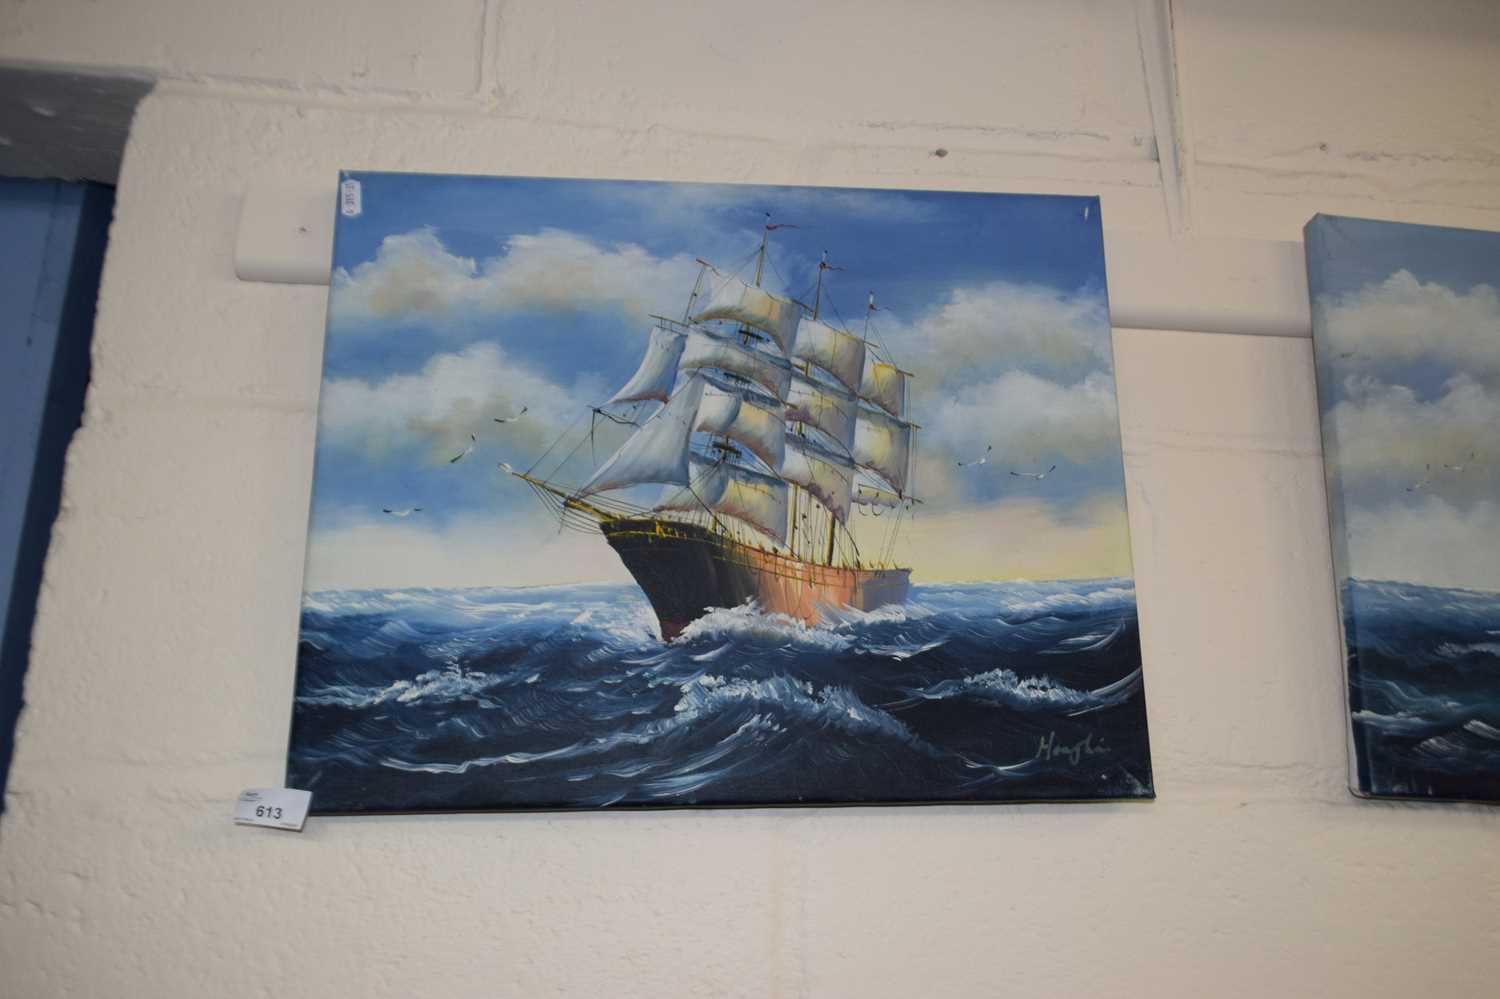 Clipper at Sea, signed Horton, oil on canvas, unframed